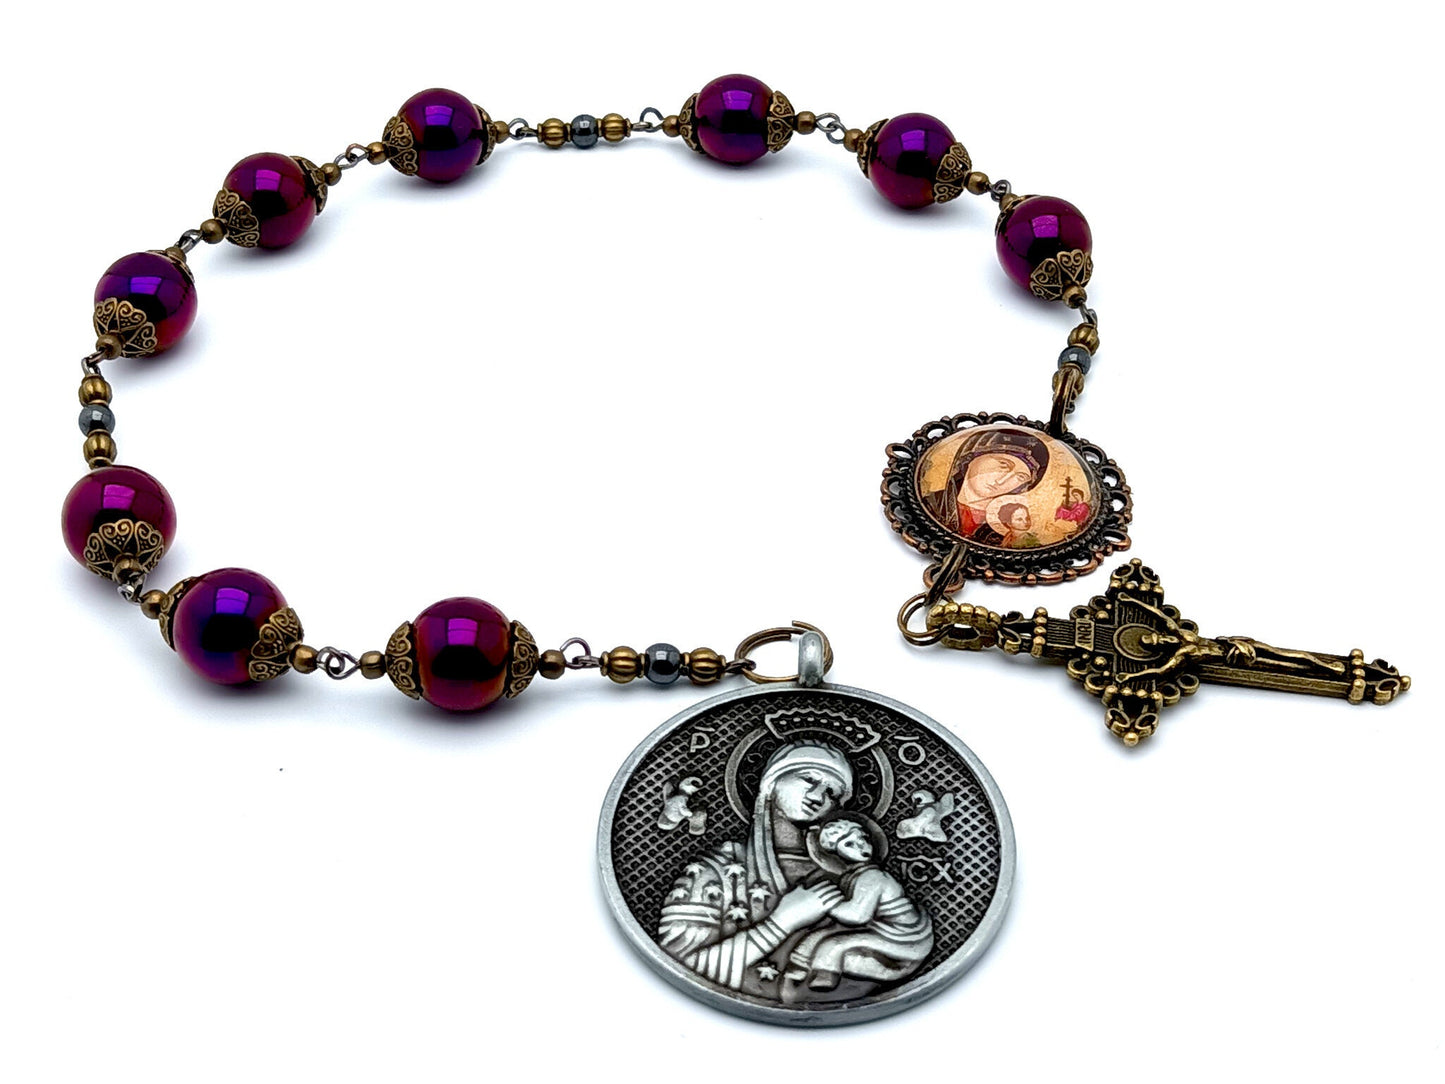 Our Lady of Perpetual Succour unique rosary beads prayer chaplet with purple and brass beads, Our Lady of Perpetual Help domed picture medals and brass crucifix.